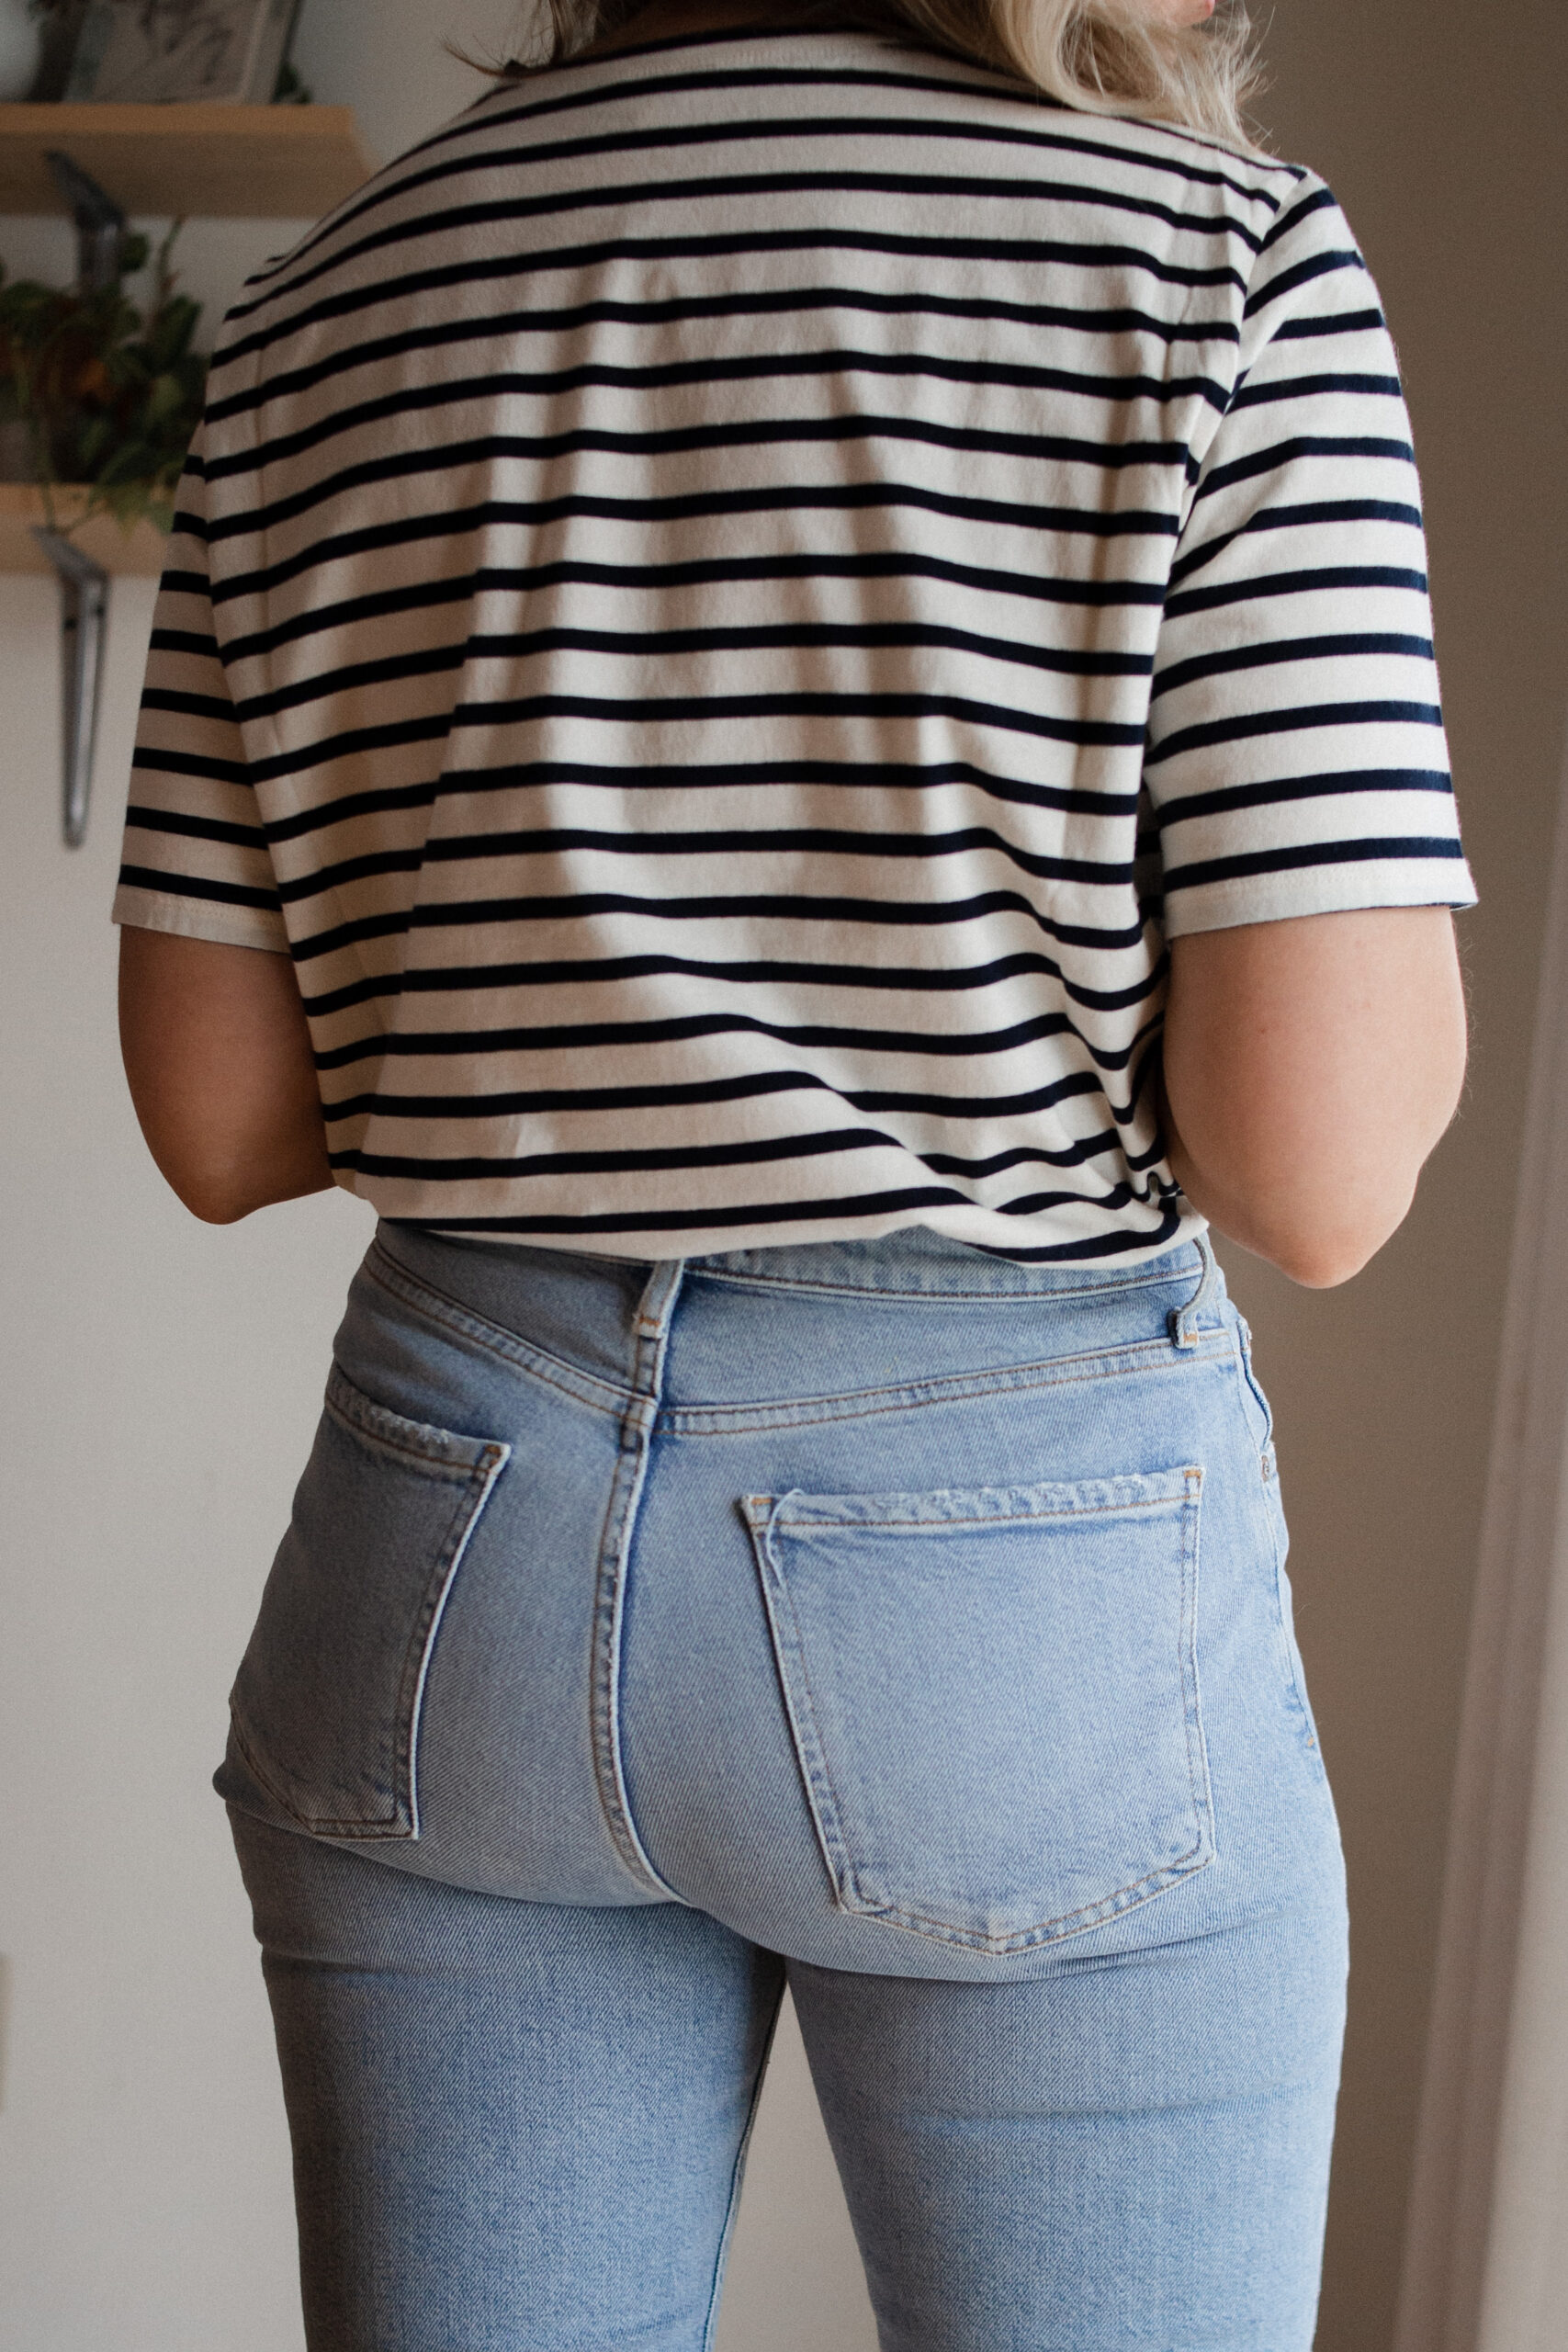 Karin Emily wears a pair of AGOLDE Nico jeans with a striped tee and brown sandals for her AGOLDE denim guide